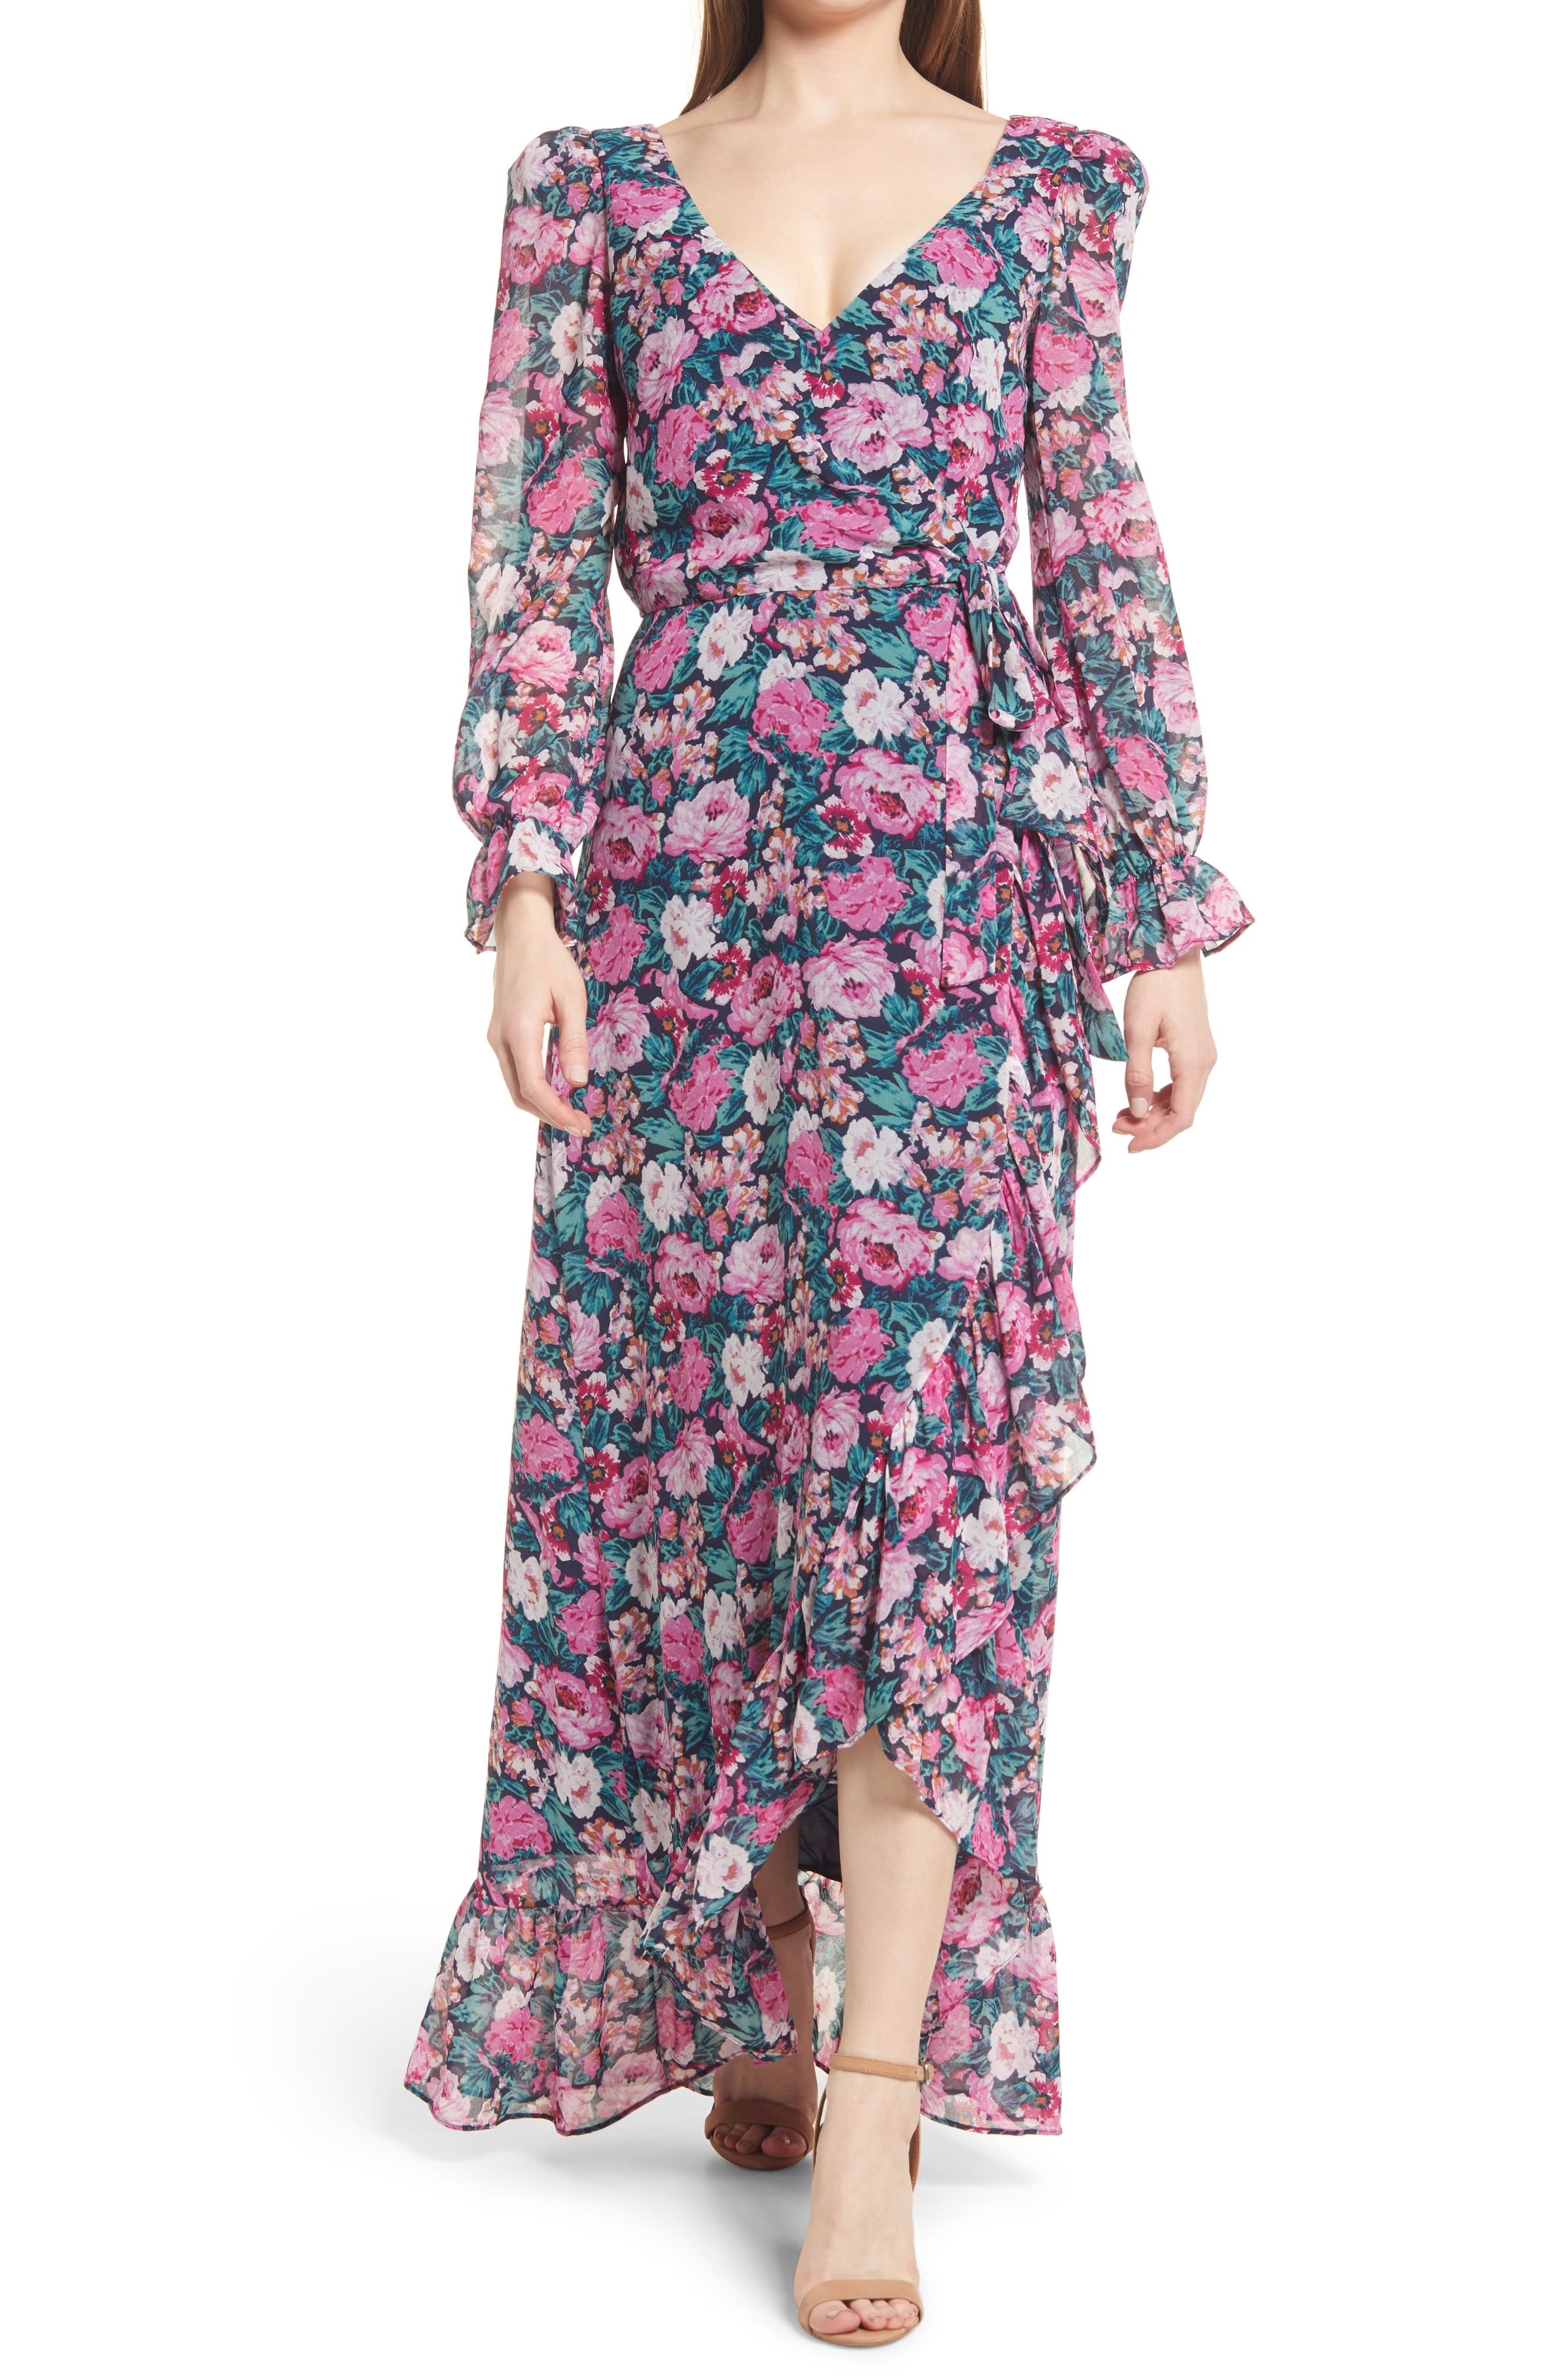 Long floral dresses with sleeves